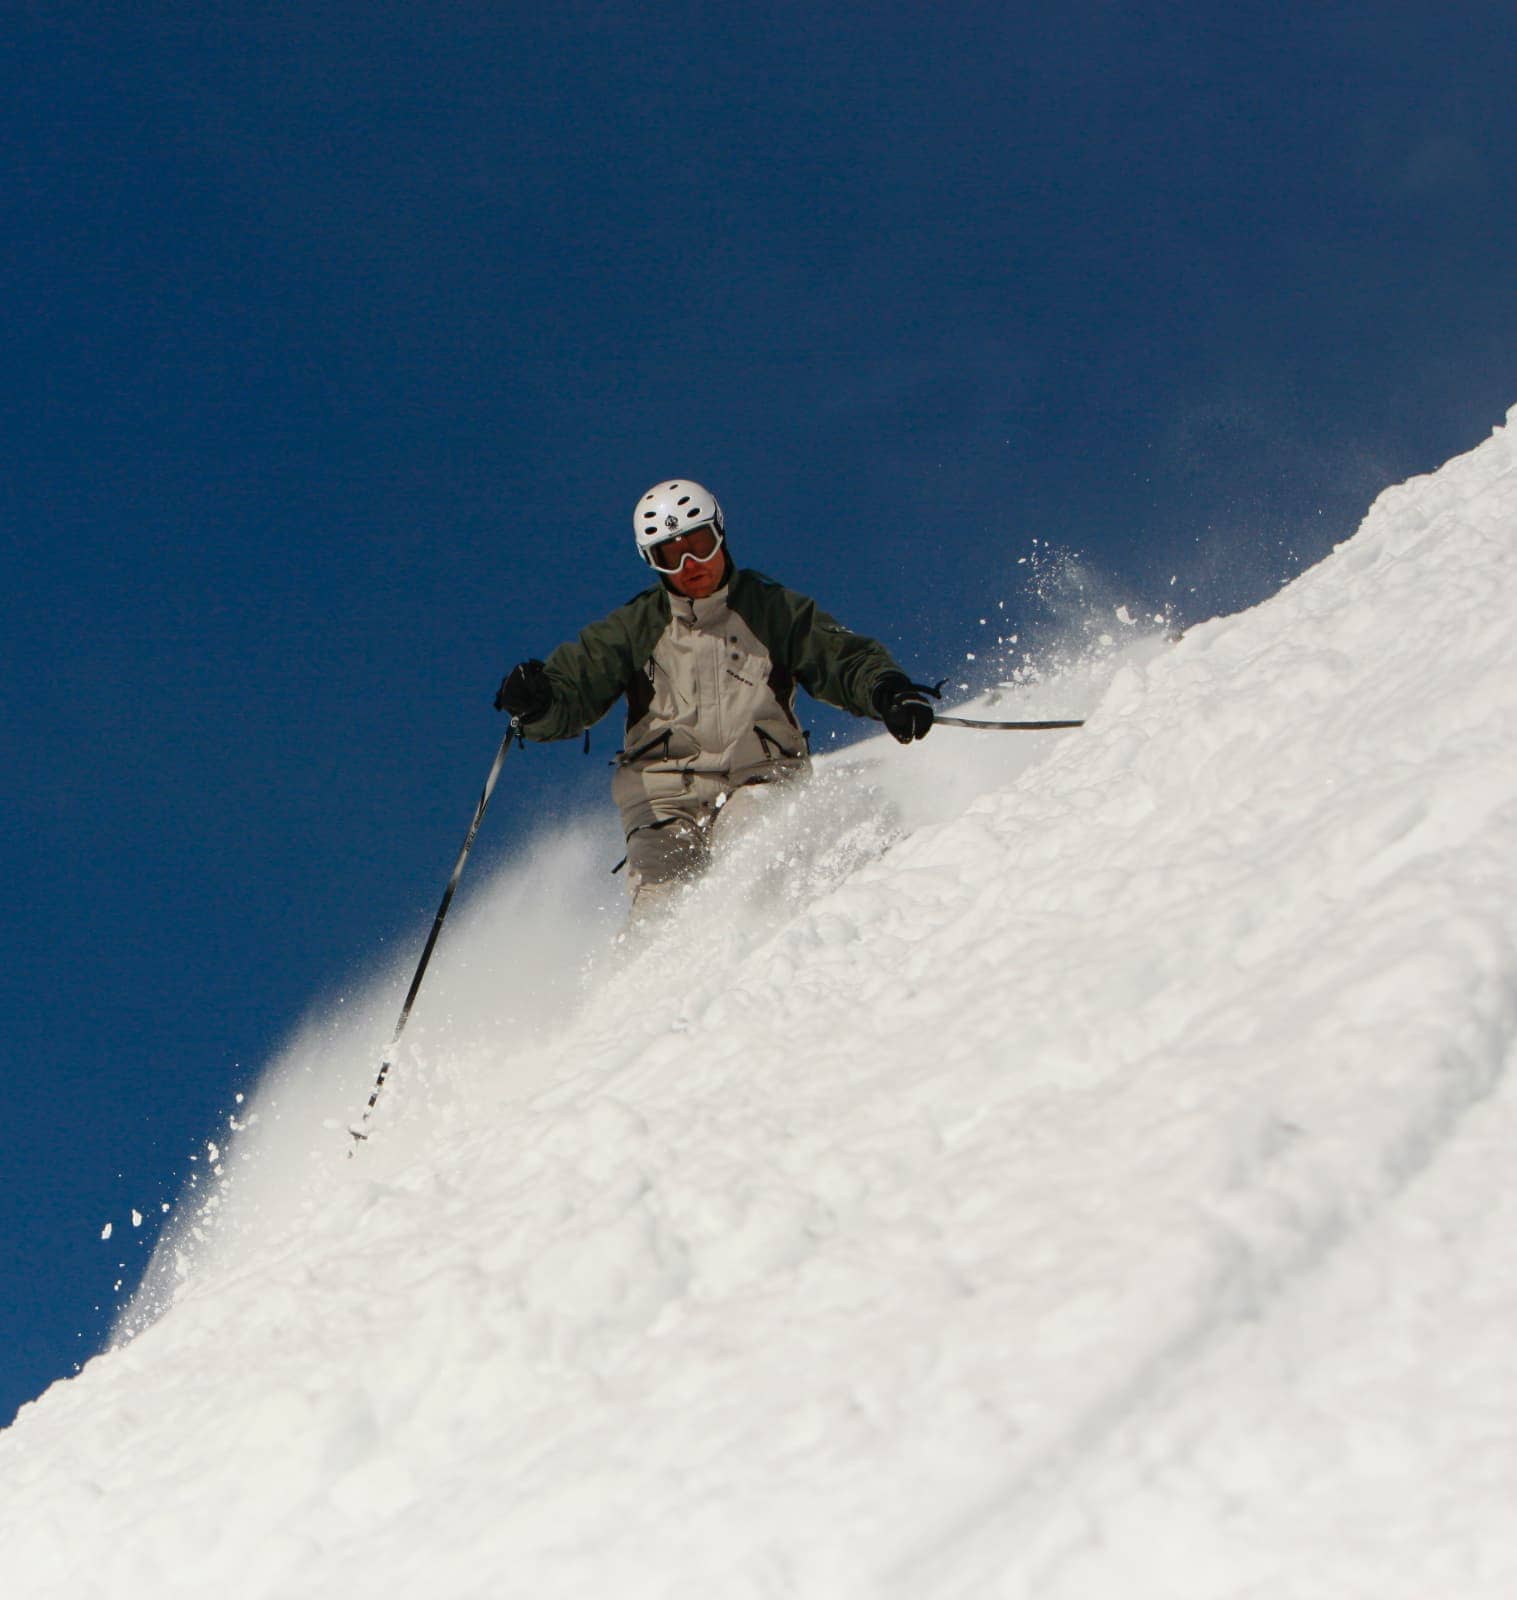 Man in white and green jacket skiing down hill